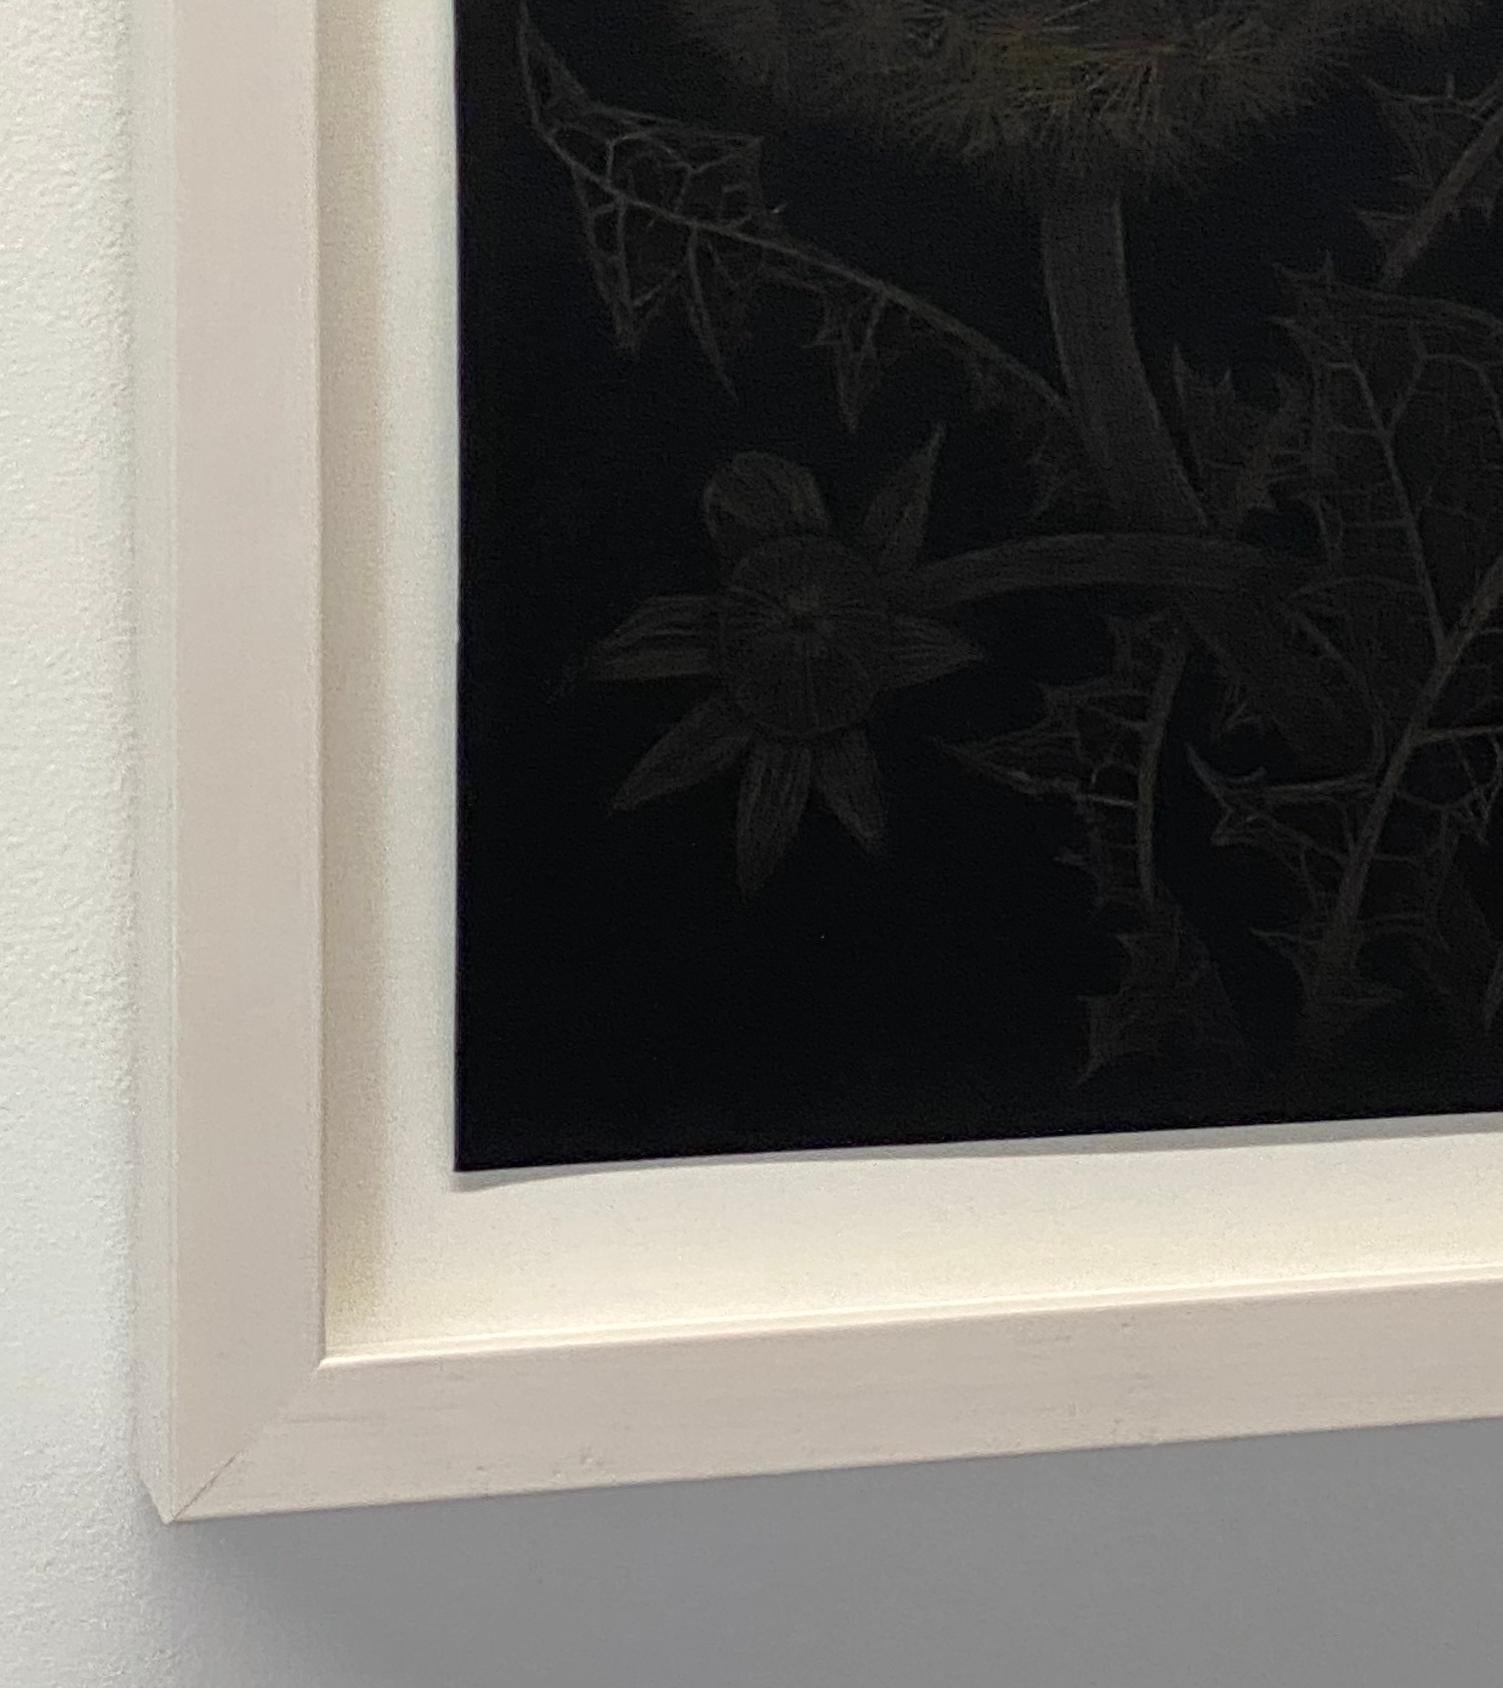 This delicate botanical drawing is made with 14 karat gold on painted black paper. The exploration of ephemerality, and the fragility of a dandelion gone to seed, its leaves and buds are the focus of this series by Margot Glass. The exquisite beauty